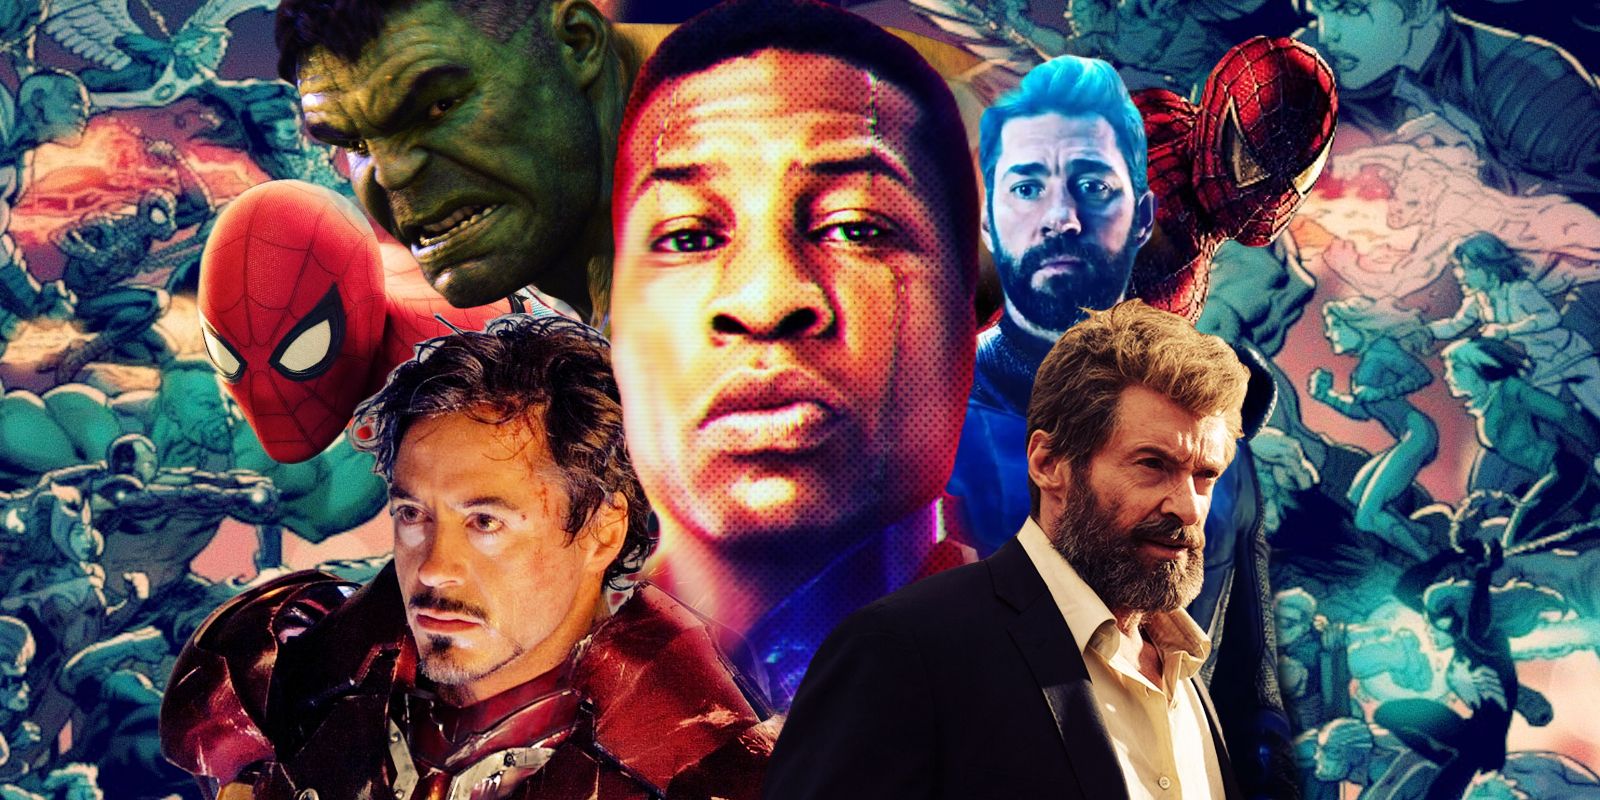 Secret Wars with Kang (Jonathan Majors) looking quite superior, Wolverine (Hugh Jackman) in Logan, Spider-Man (Tobey Maguire) perched, Spider-Man (Tom Holland) in a battle stance, Mister Fantastic (John Krasinski) emerging from a time door, Hulk (Mark Ruffalo) in a rage, and Iron Man (Robert Downey Jr.) with his mask off